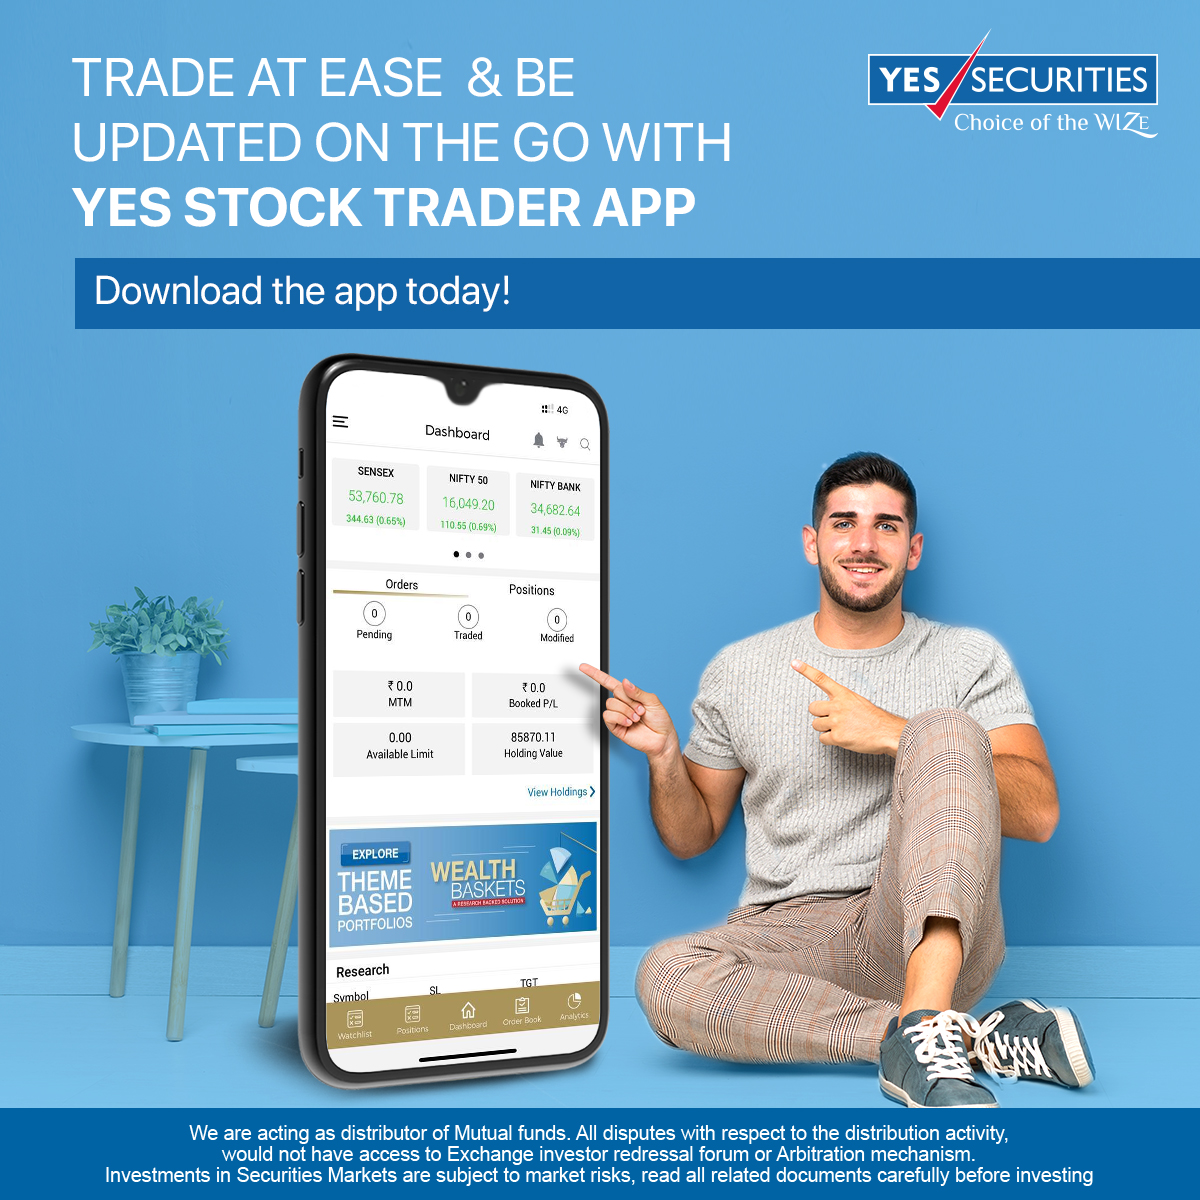 Yes stock trader app